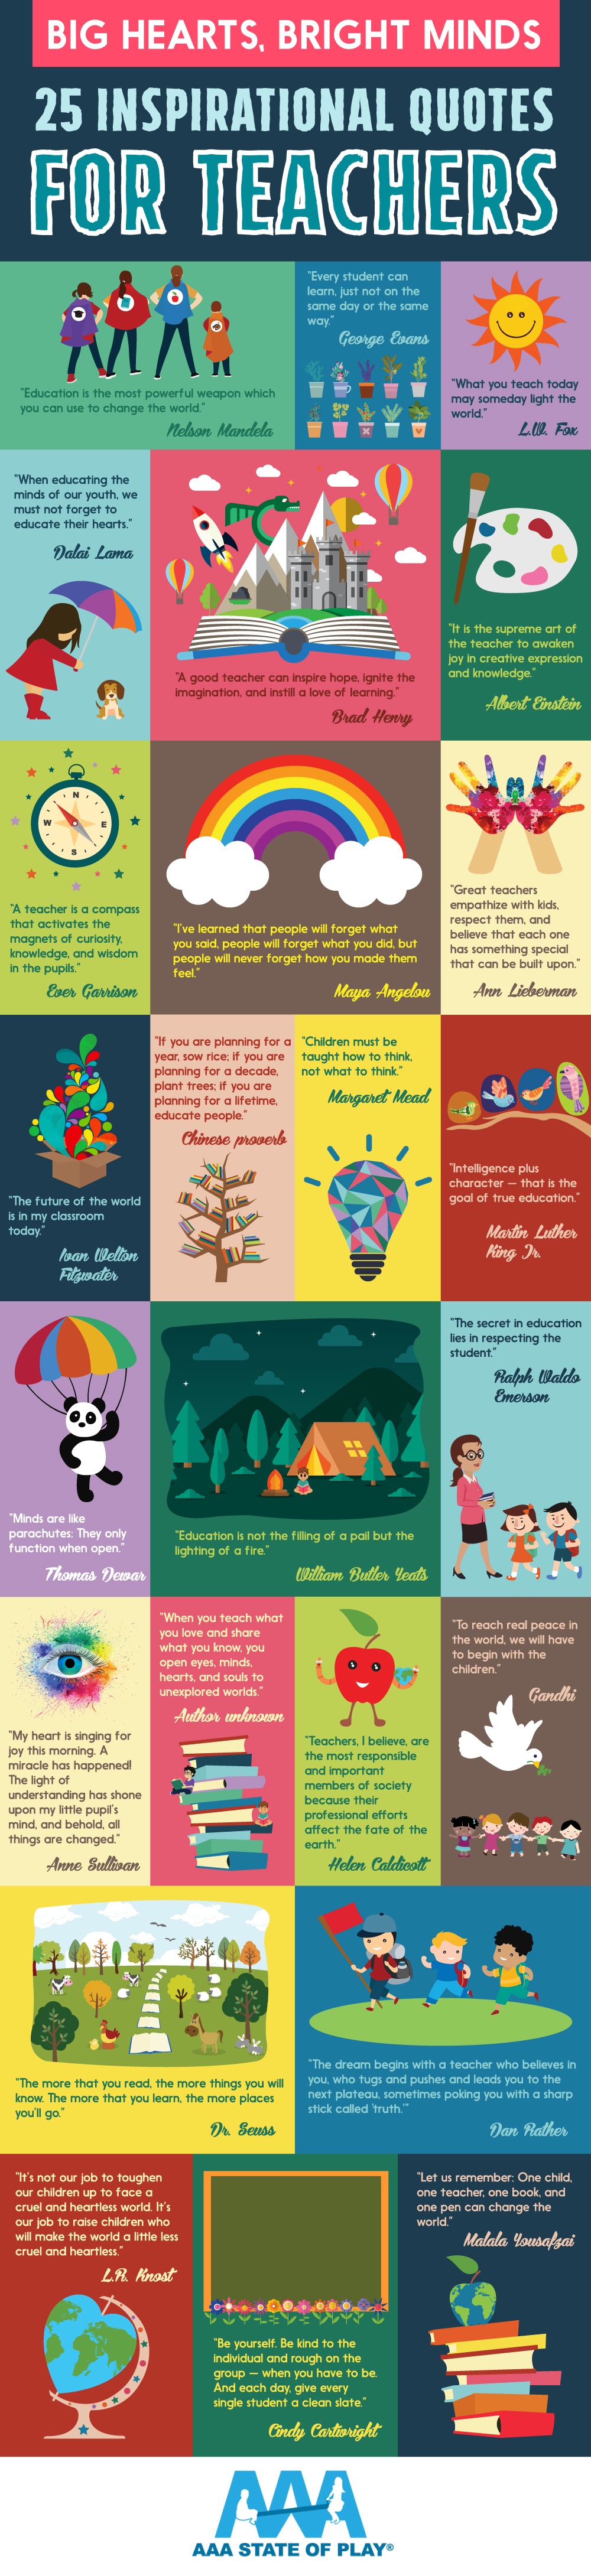 25 Inspirational Quotes for Teachers Infographic